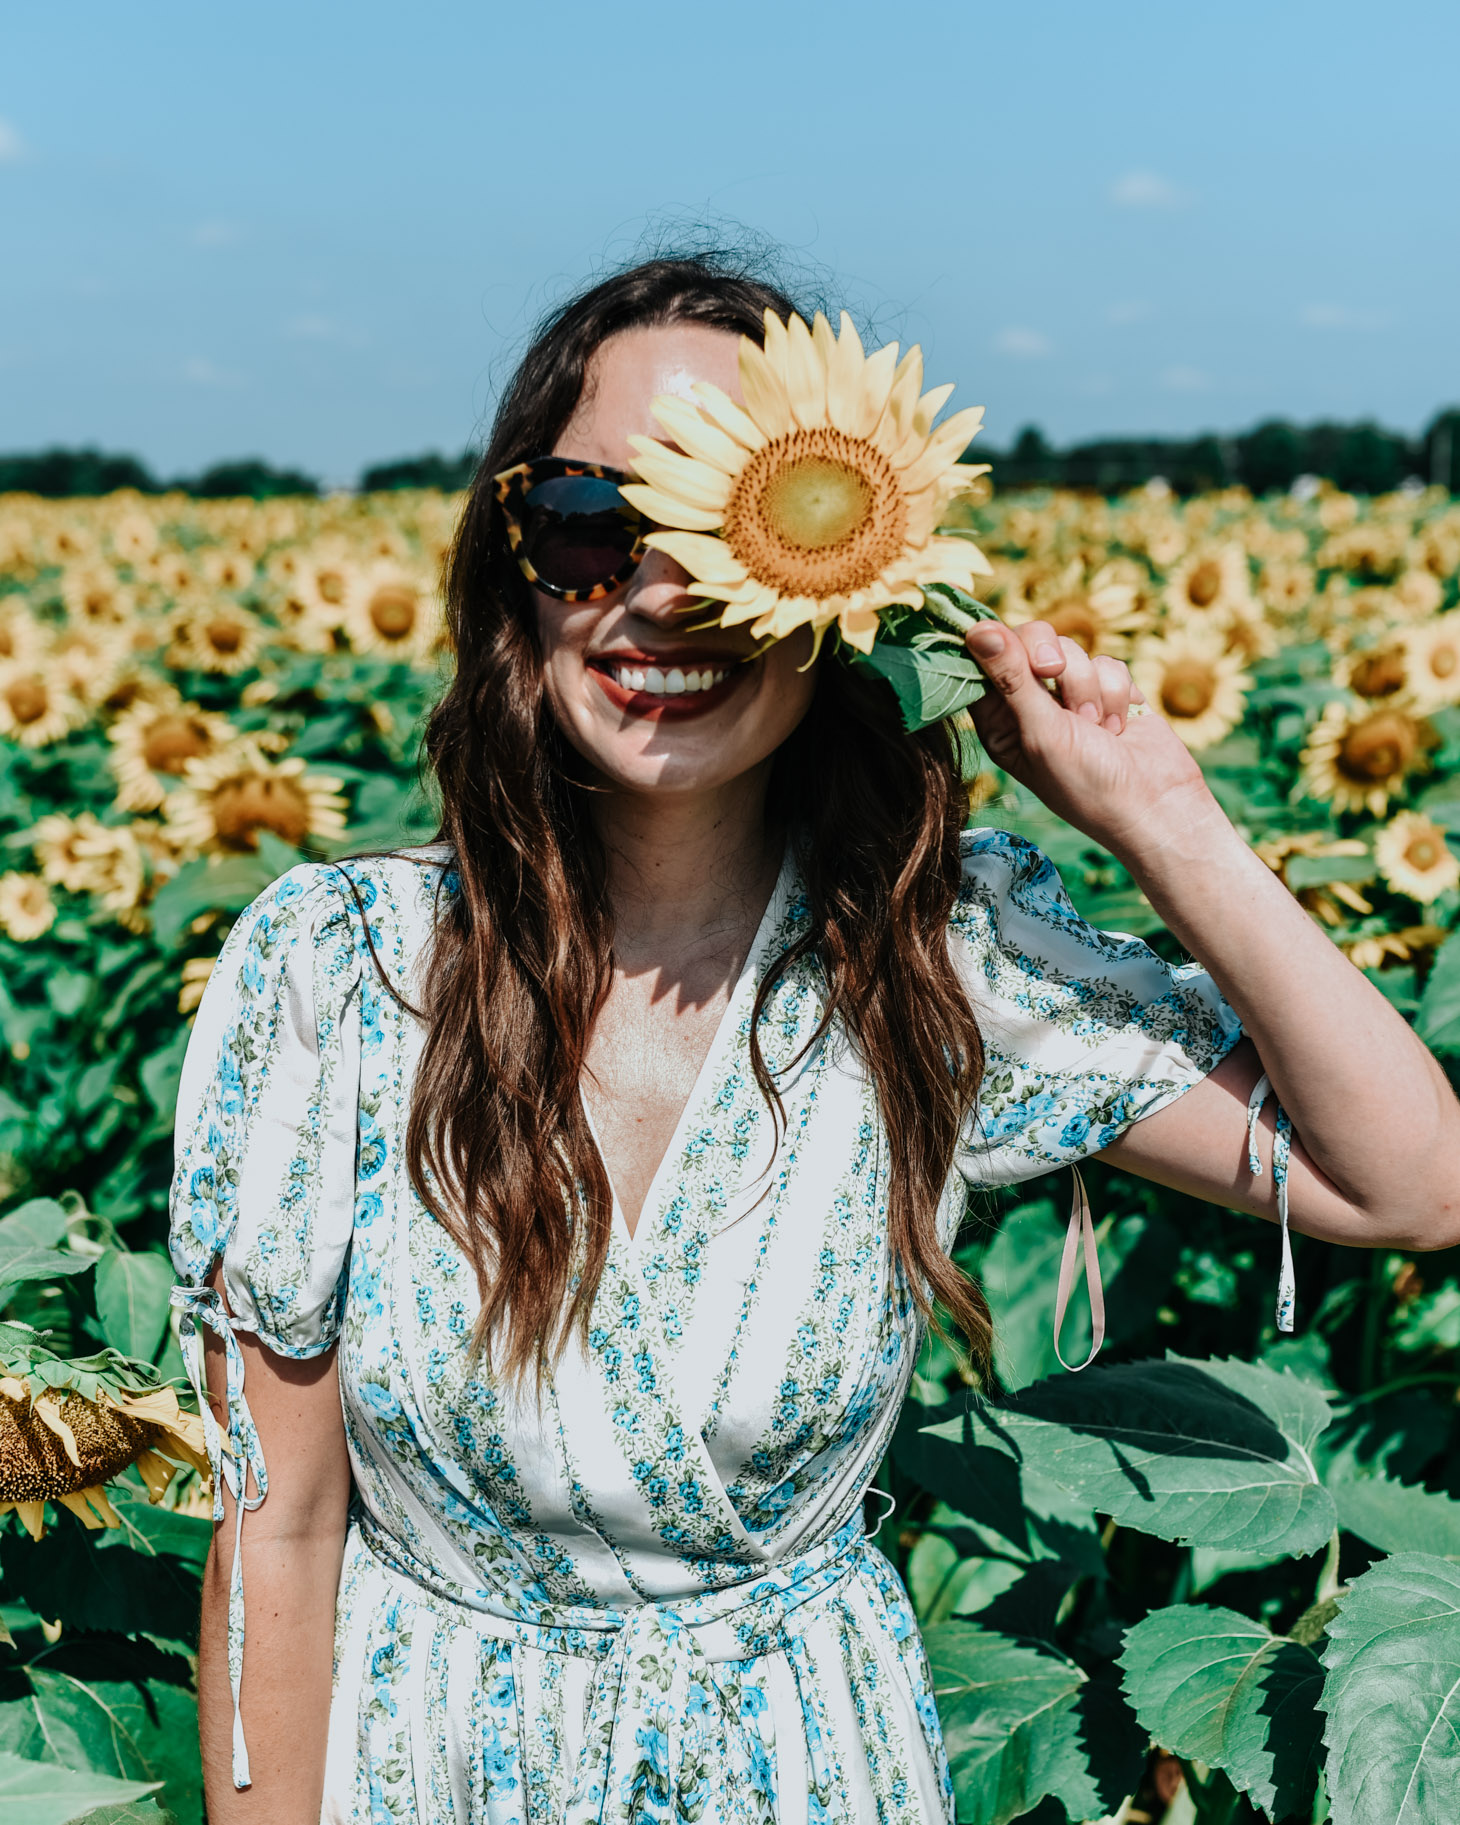 5 Dress Designers to Take Note Of this Summer by popular Memphis fashion blog, Lone Star Looking Glass: image of a woman standing in a sunflower field, holding a sunflower up to her face, and wearing a Gal Meets Glam Dress.